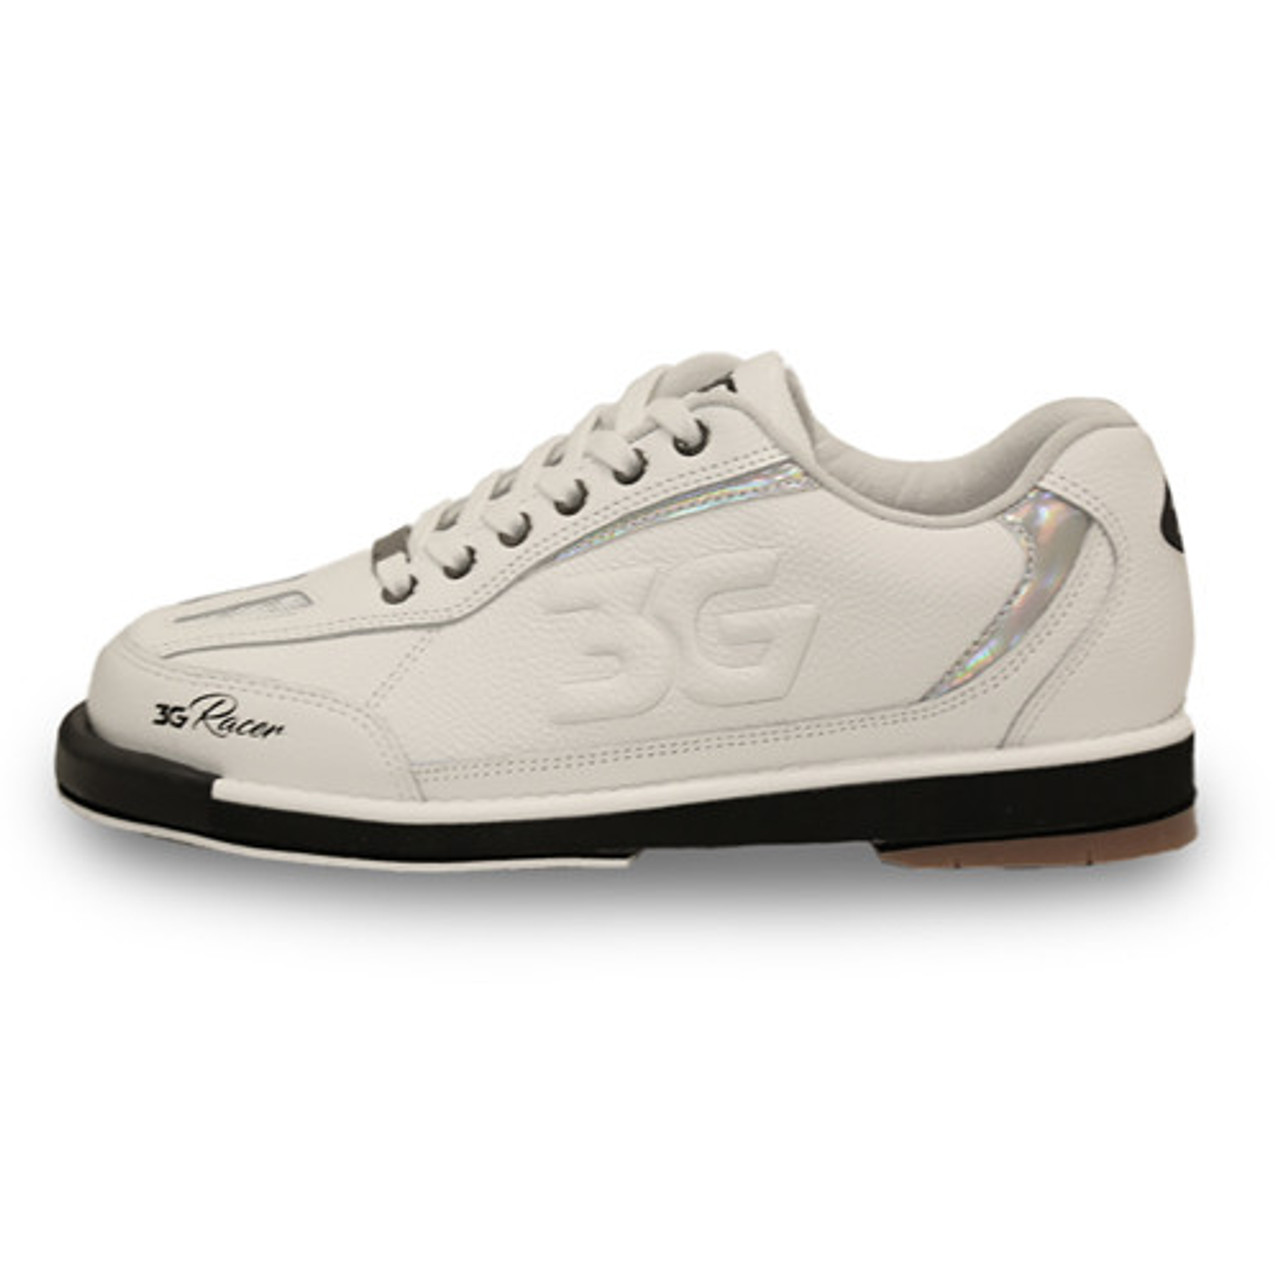 3G Racer Mens Bowling Shoes White/Holo Right Hand WIDE